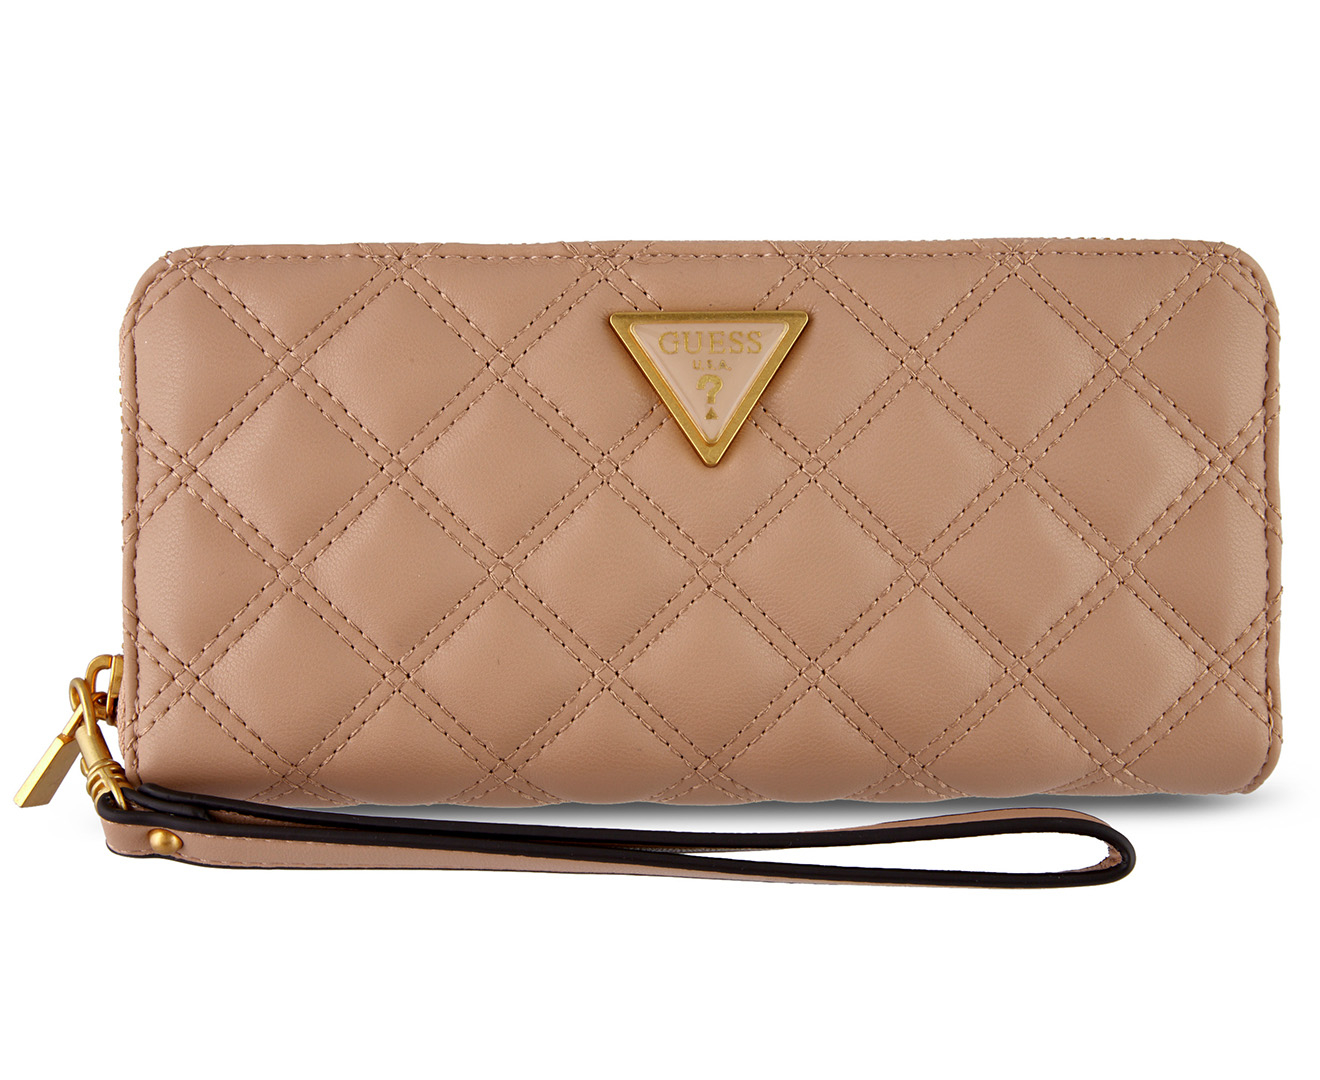 GUESS Giully Large Zip Around Wallet - Beige | M.catch.com.au